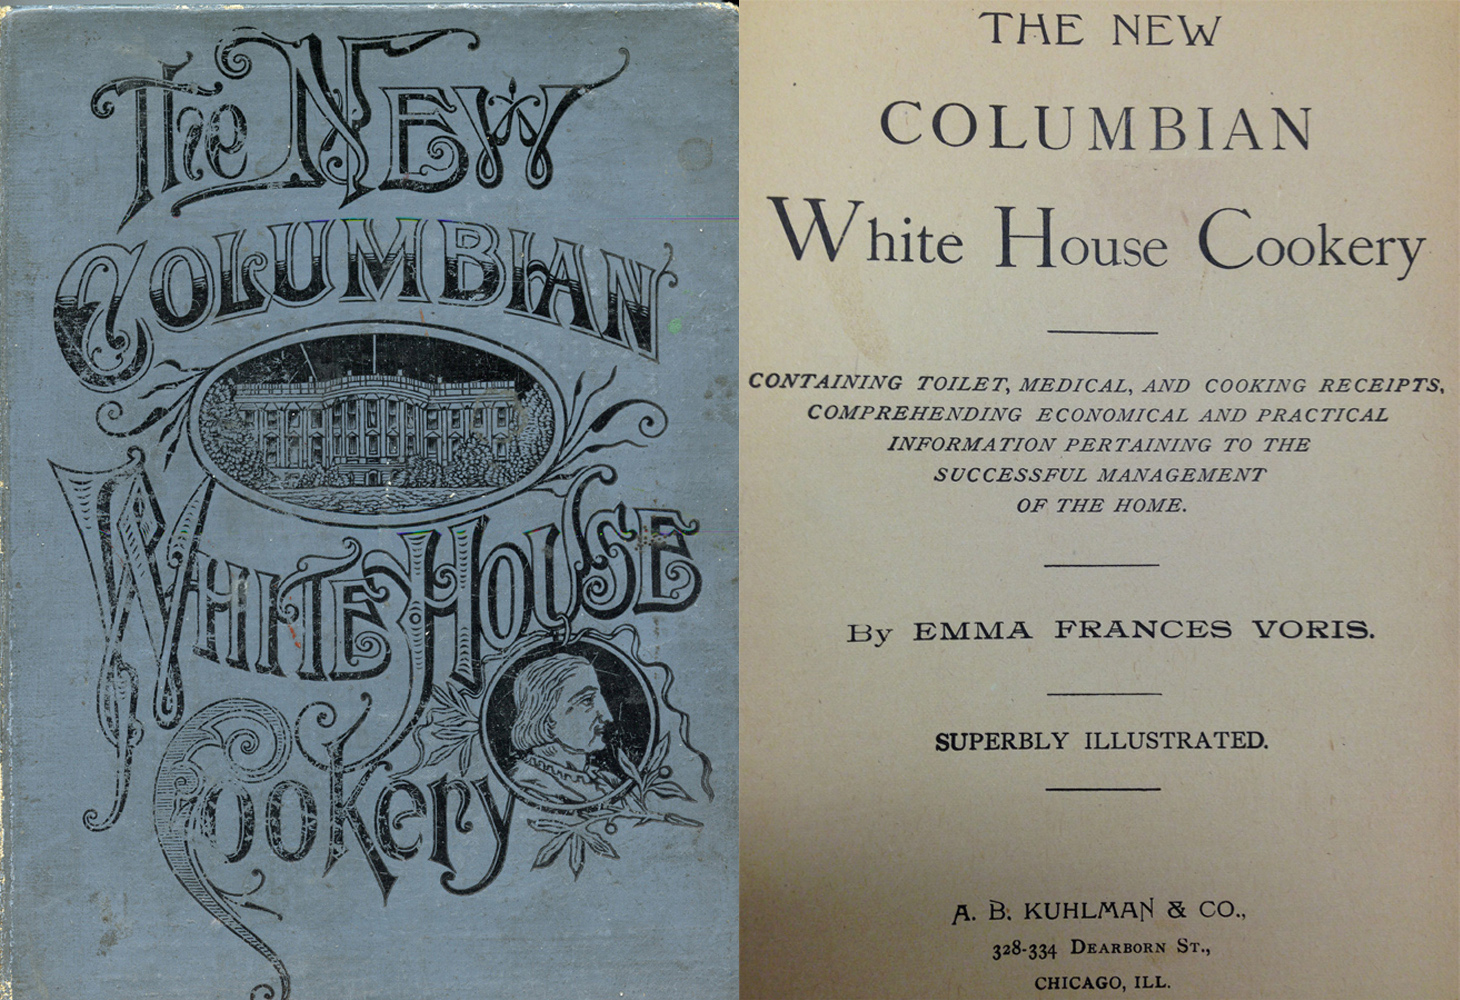 Cover and title page of a cookbook called The New Columbian White House Cookery